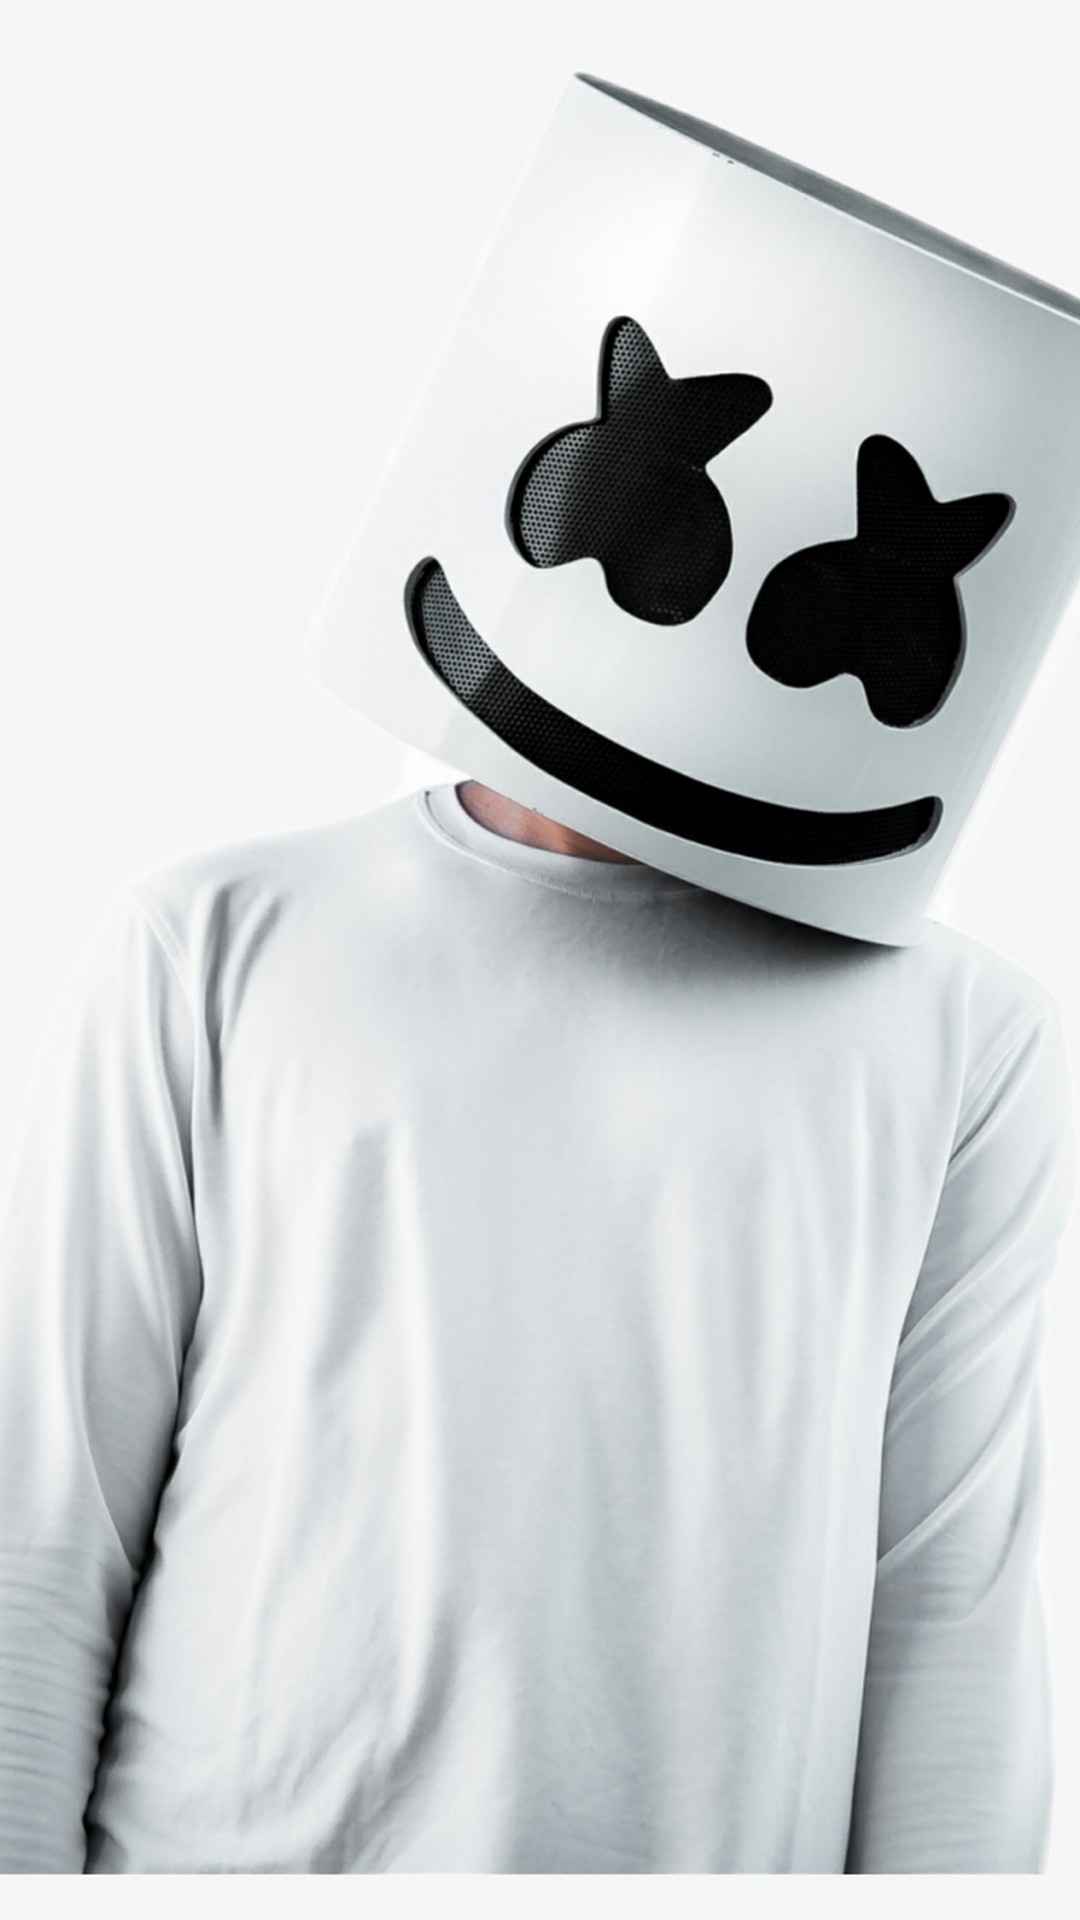 Marshmello Cell Phones Wallpaper with high-resolution 1080x1920 pixel. Download all Mobile Wallpapers and Use them as wallpapers for your iPhone, Tablet, iPad, Android and other mobile devices